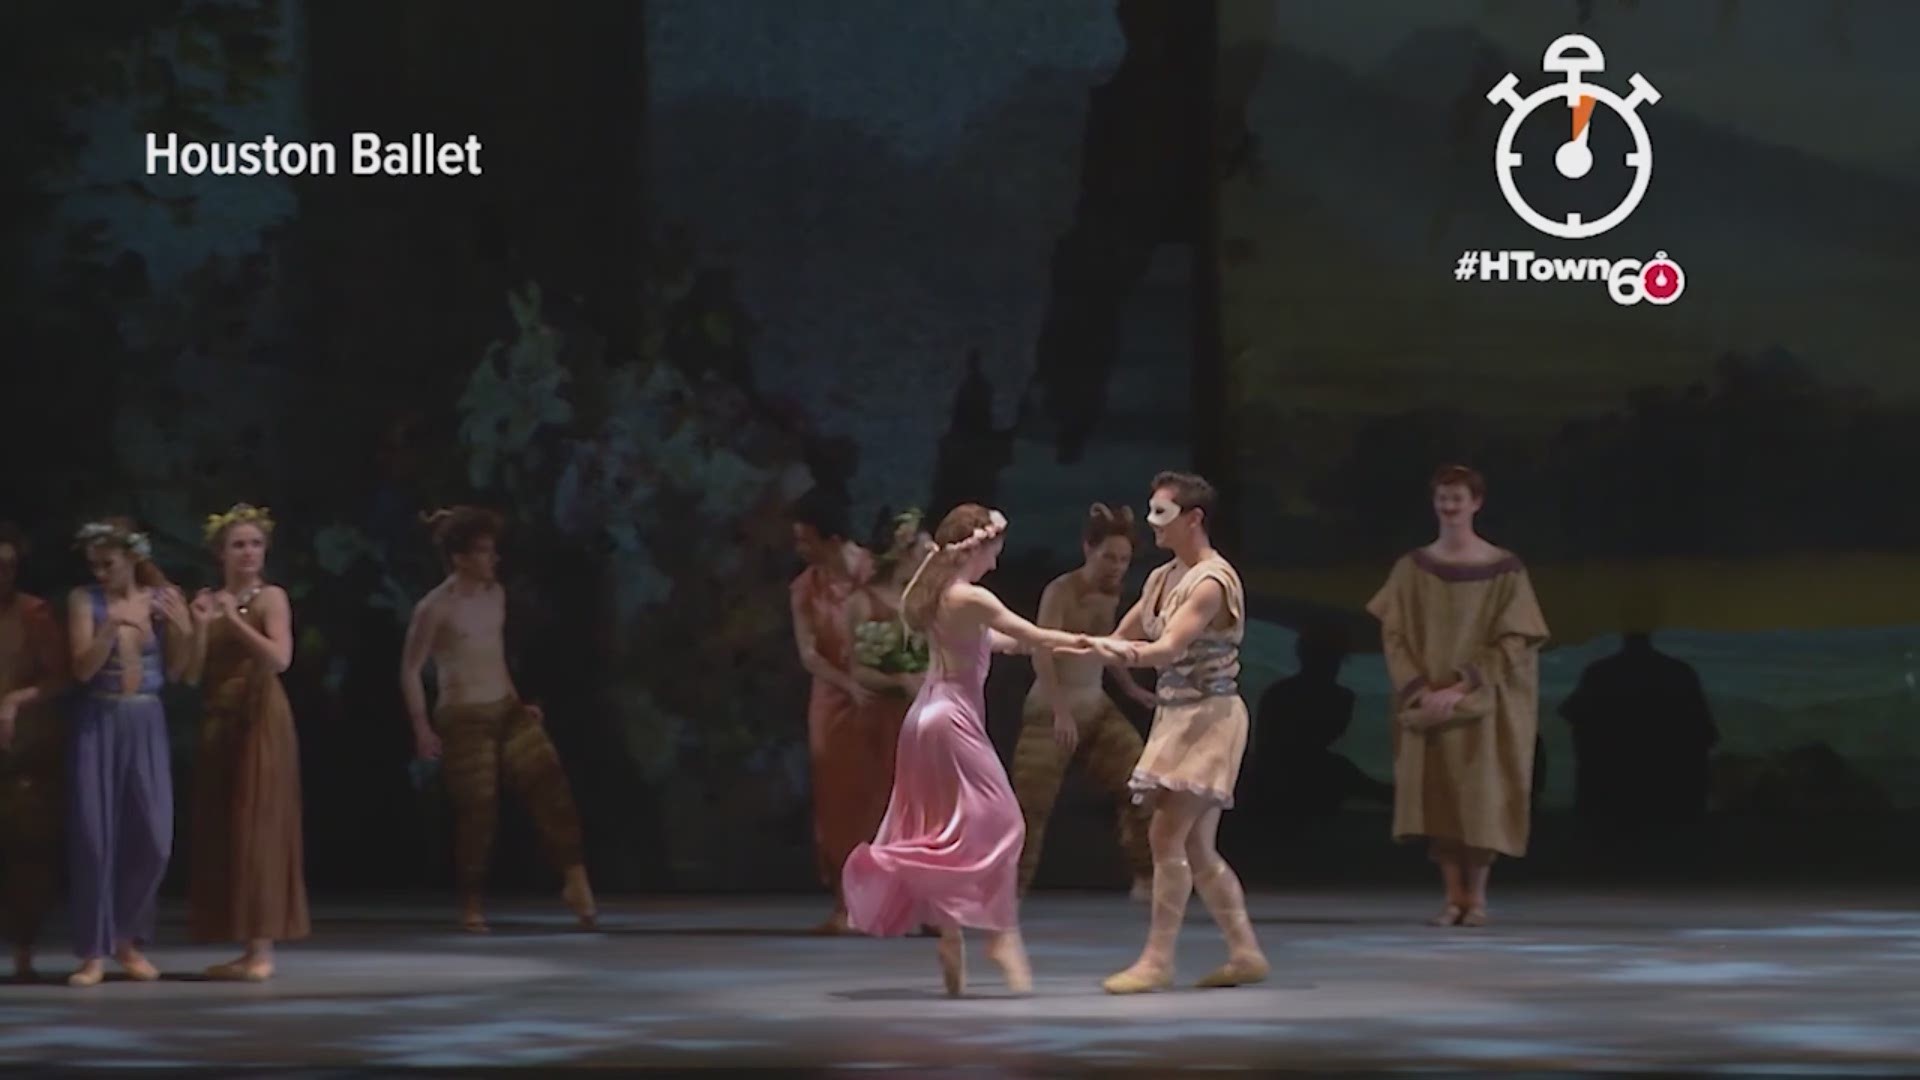 The Houston Ballet is wrapping up its world premiere of “Sylvia,” a show two years in the making.  Brandi Smith shows us what goes into a production of this size – in this morning's HTown60.